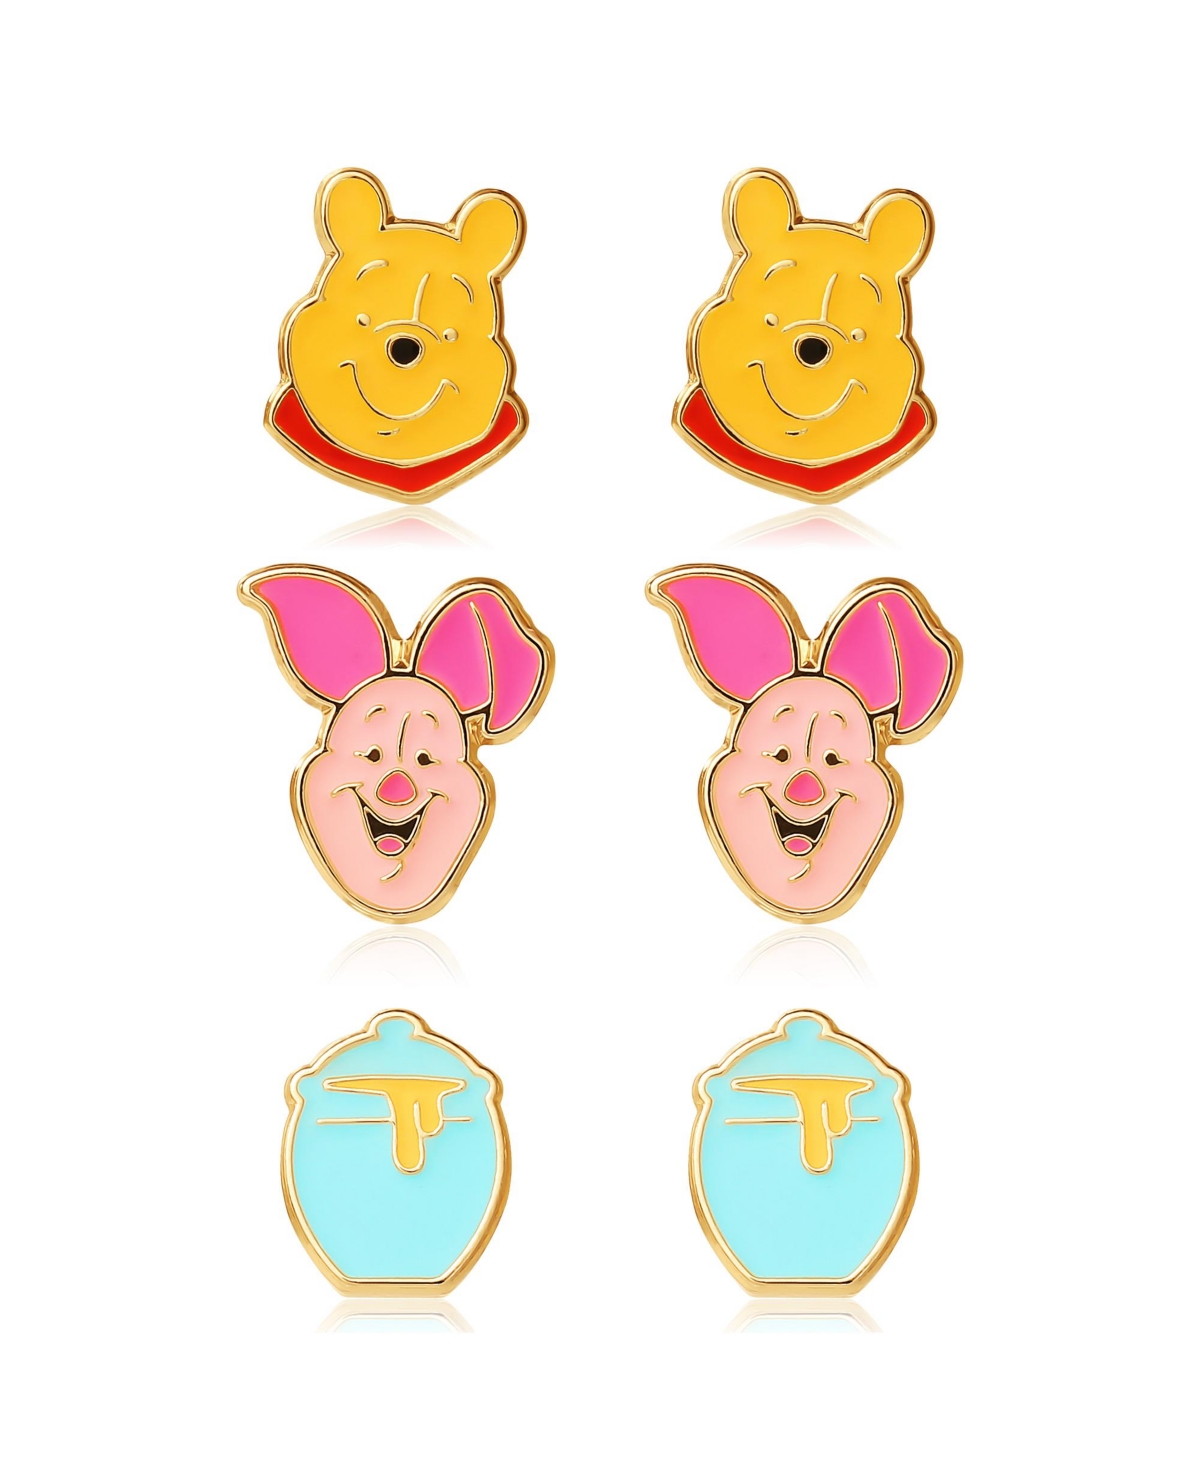 Winnie the Pooh Gold Flash Plated Stud Earring Set, 3 Pairs - Yellow, pink, blue